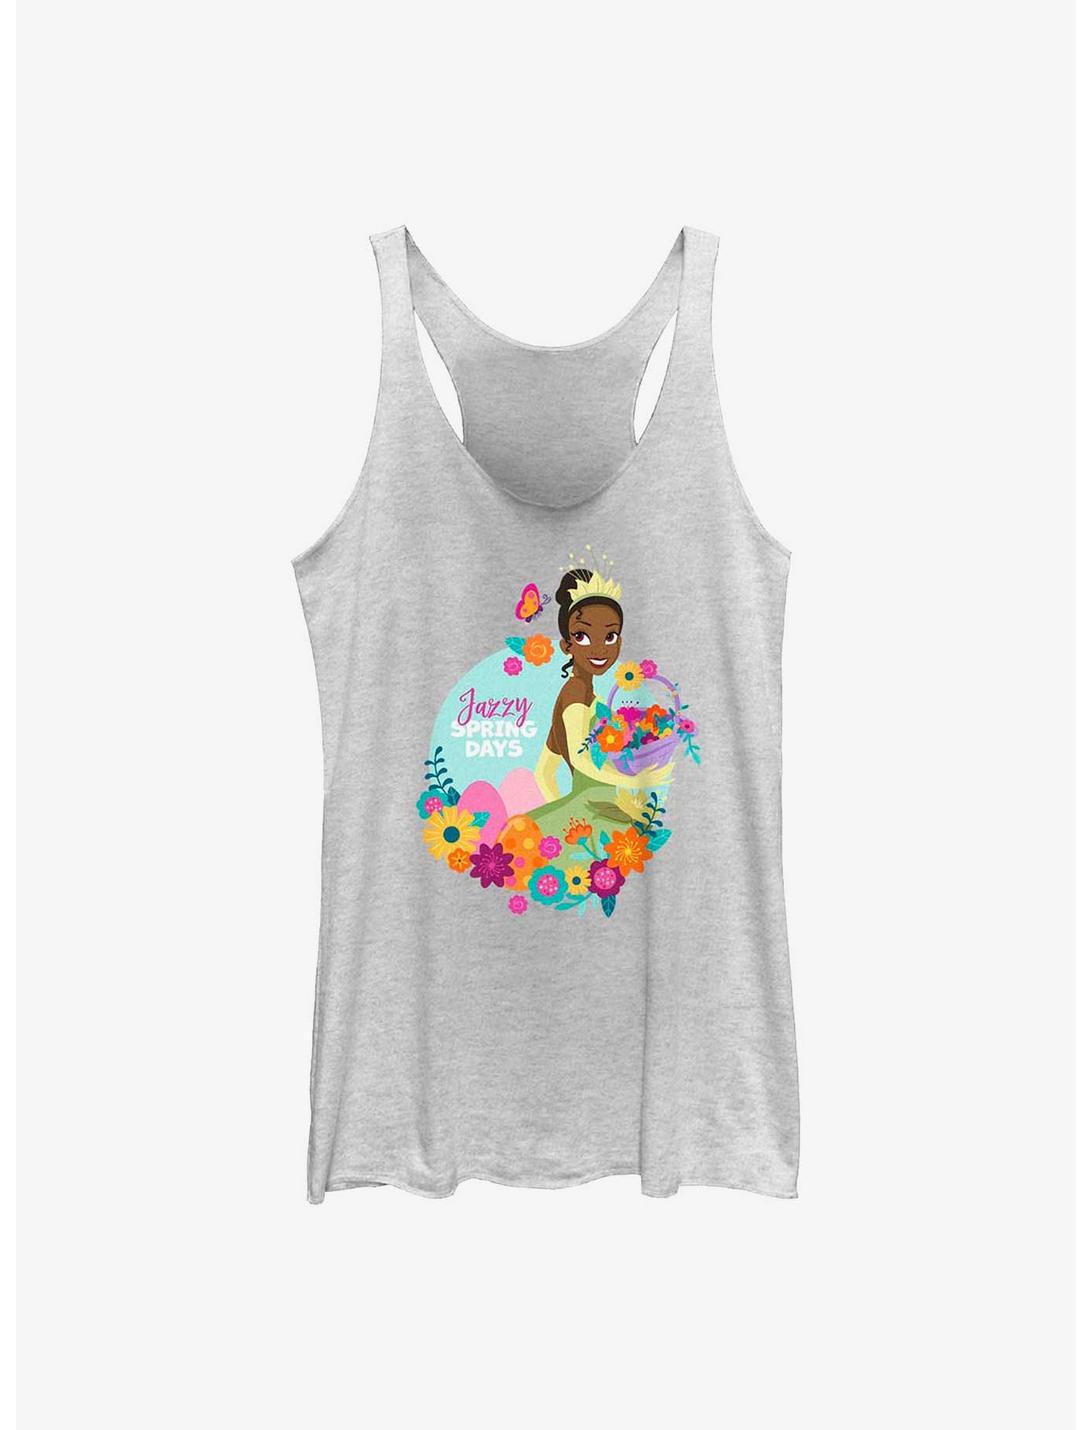 Disney Princess and The Frog Jazzy Spring Days Womens Tank Top, WHITE HTR, hi-res